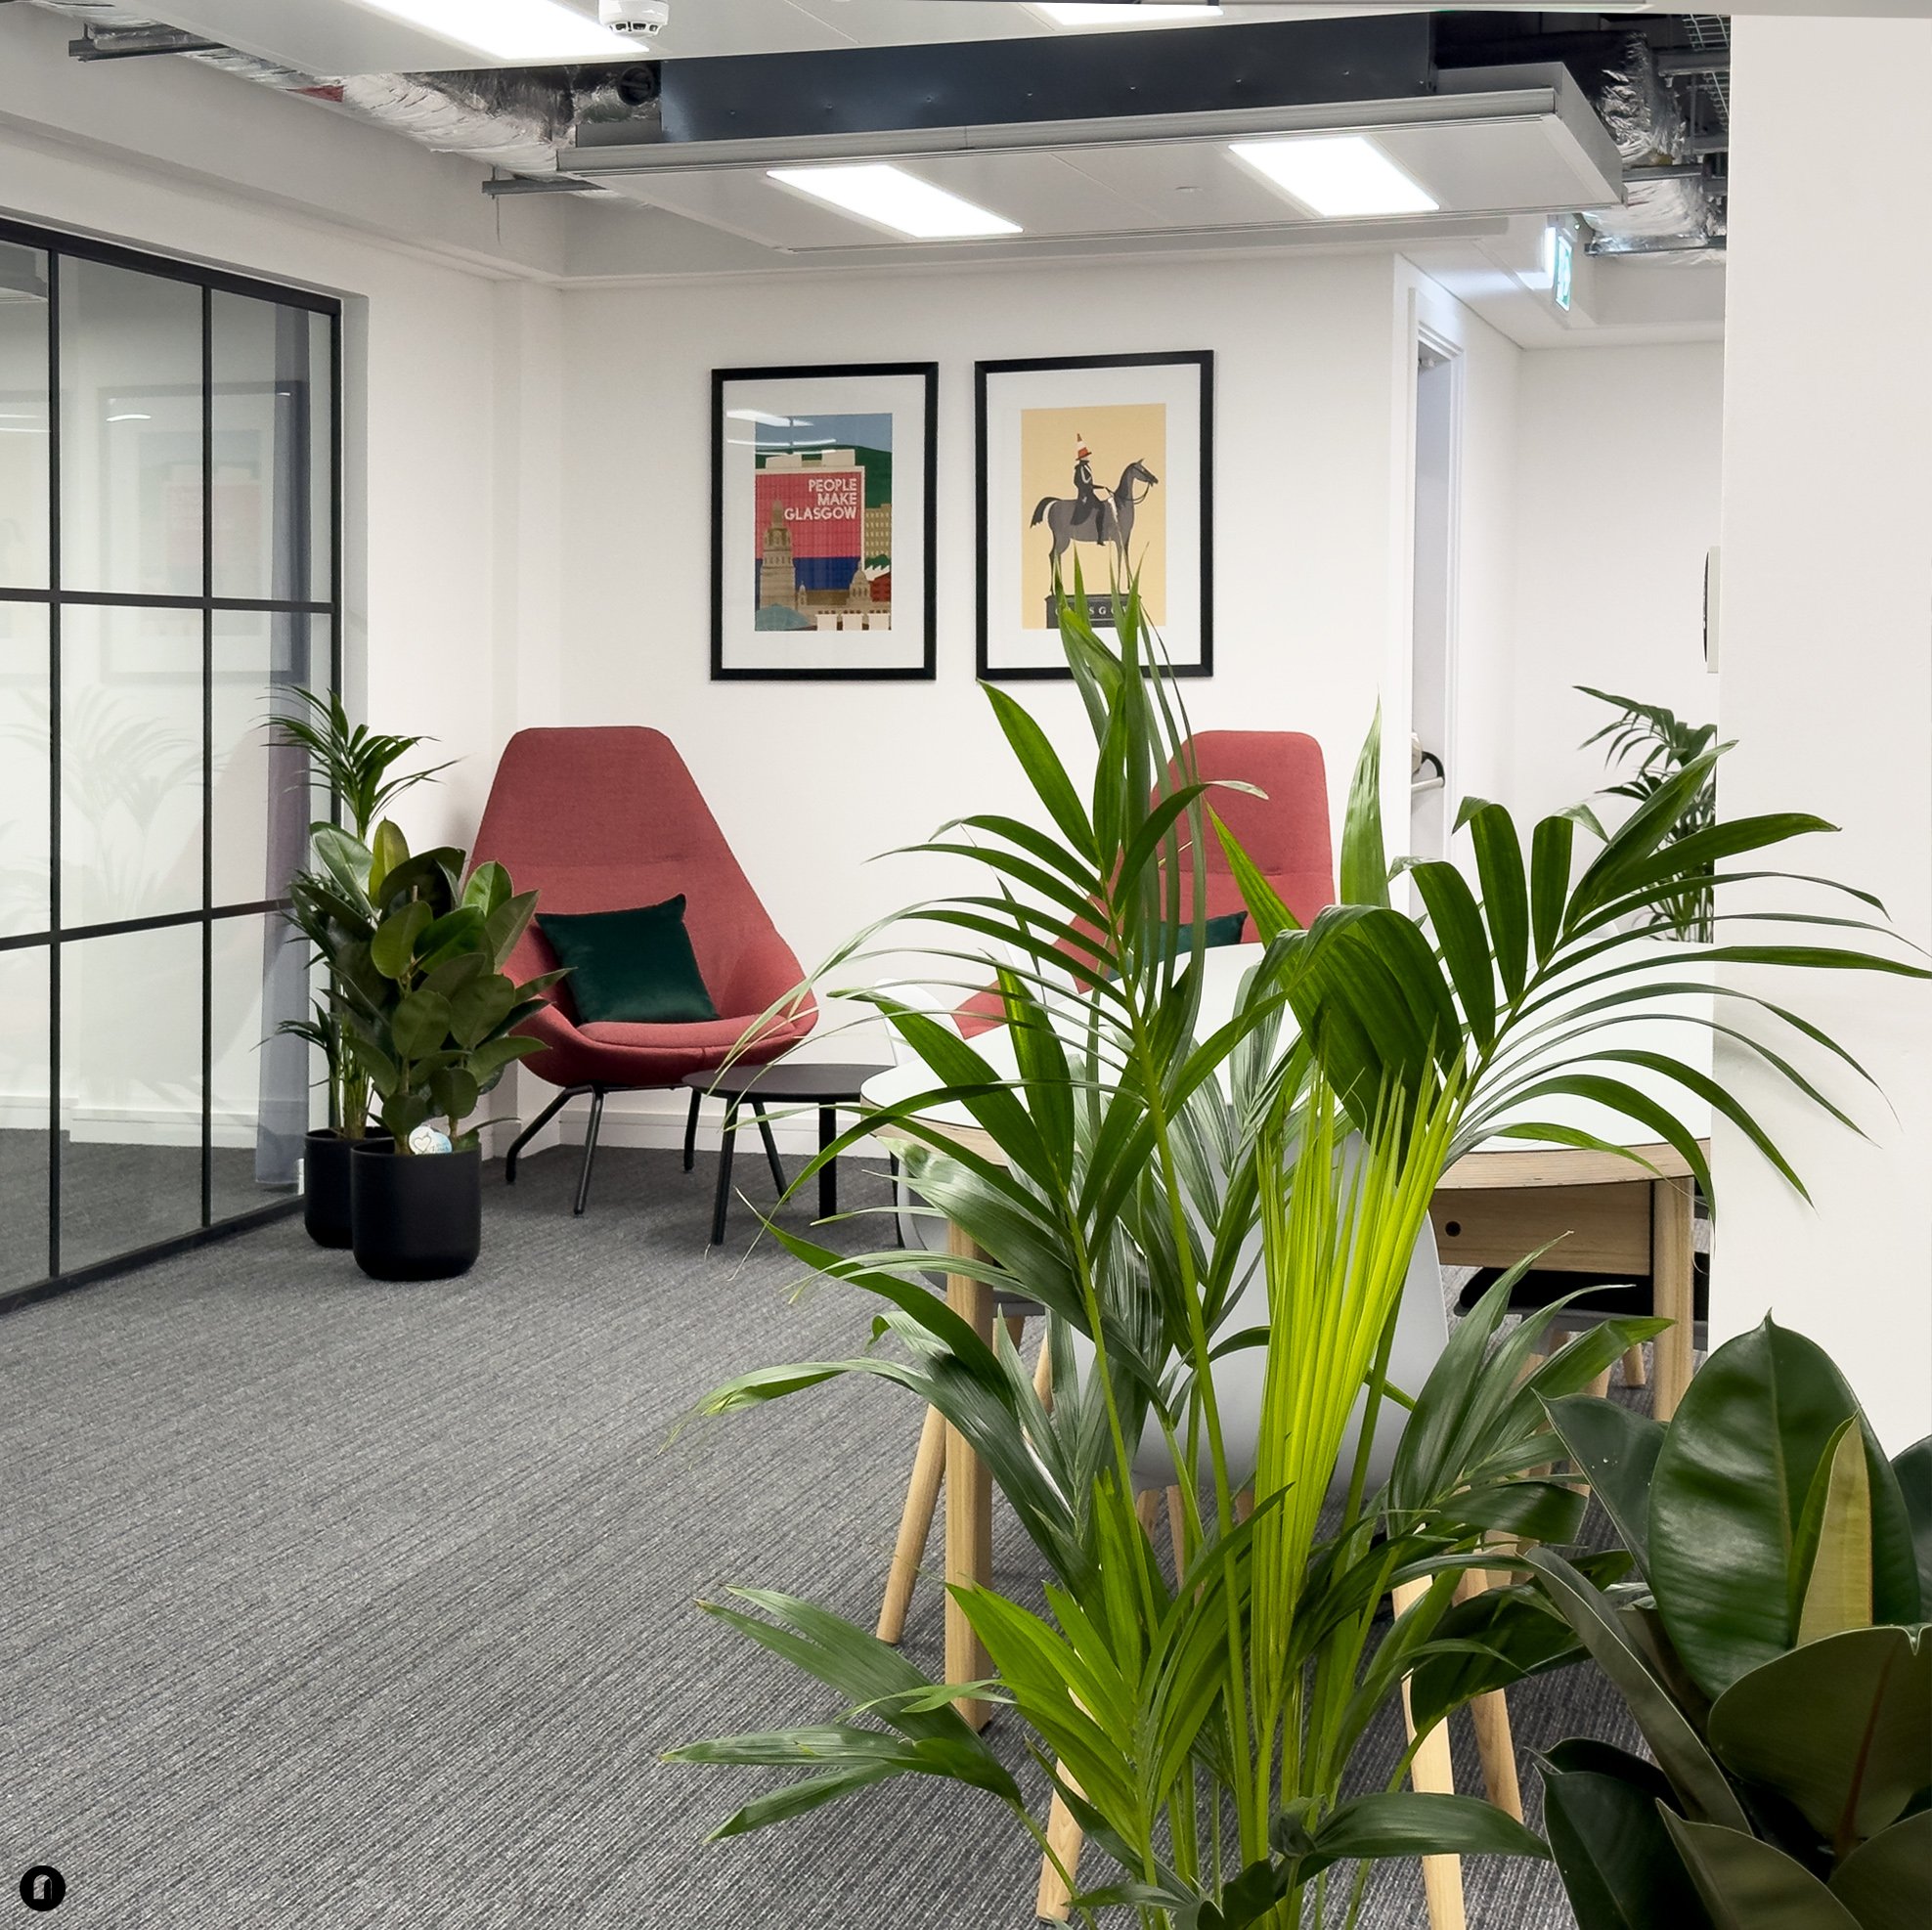 🏢 Our team at Arch Interiors had the privilege to dress the freshly refurbished office spaces on West George Street in Glasgow 🏢 

🎨 We've woven a tapestry of local flair by adorning the walls with captivating artwork from talented area artists, i